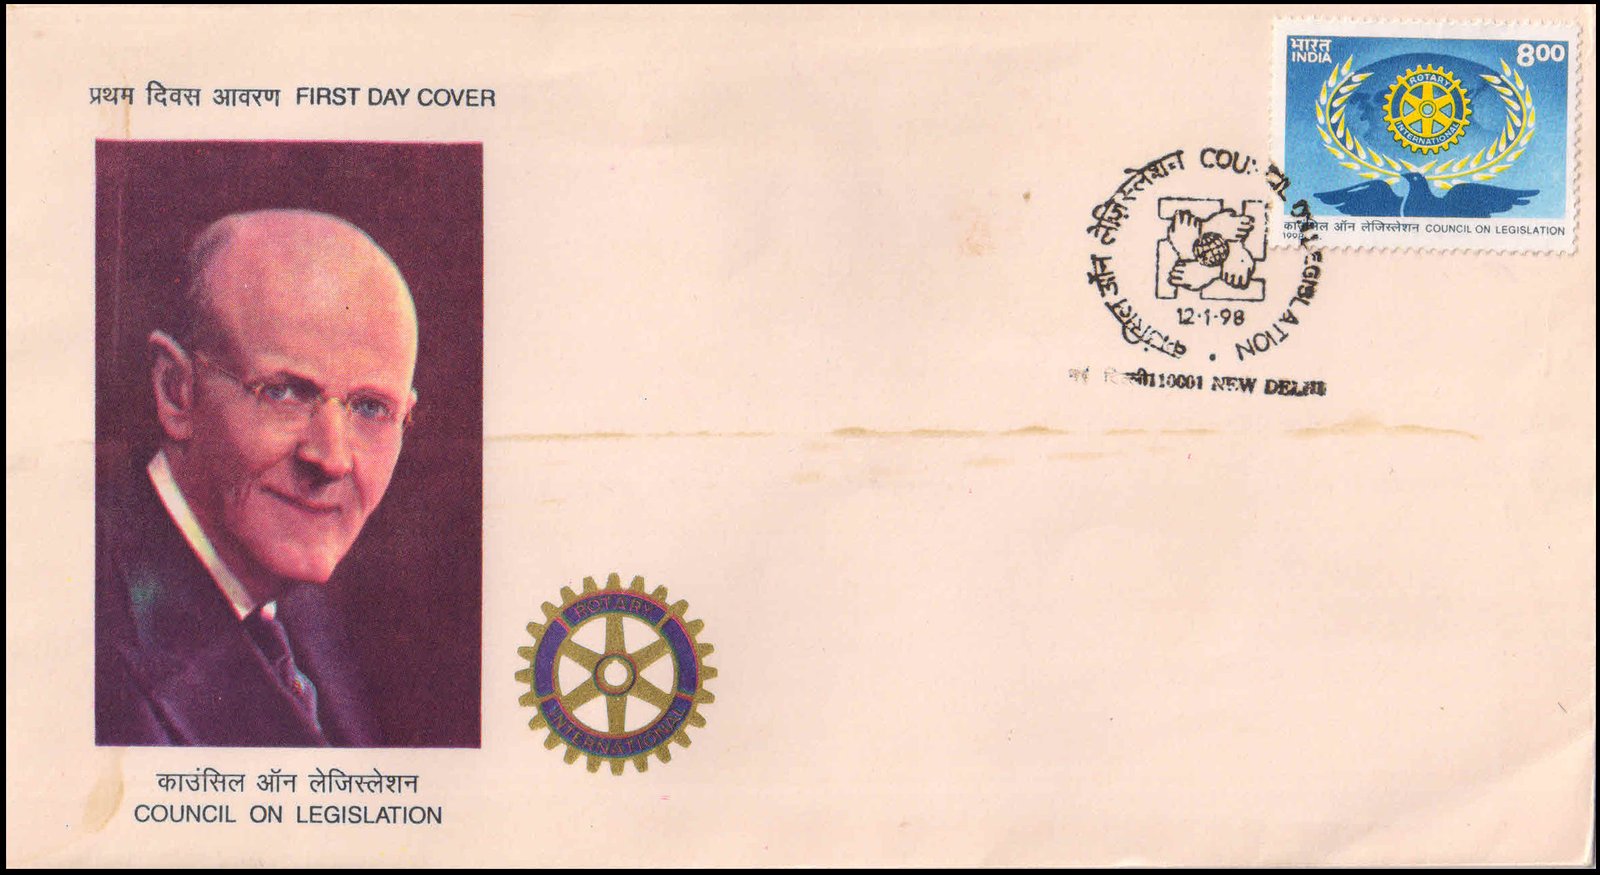 INDIA 12-1-98, Council on Legislation, Rotary Rs. 8, FDC